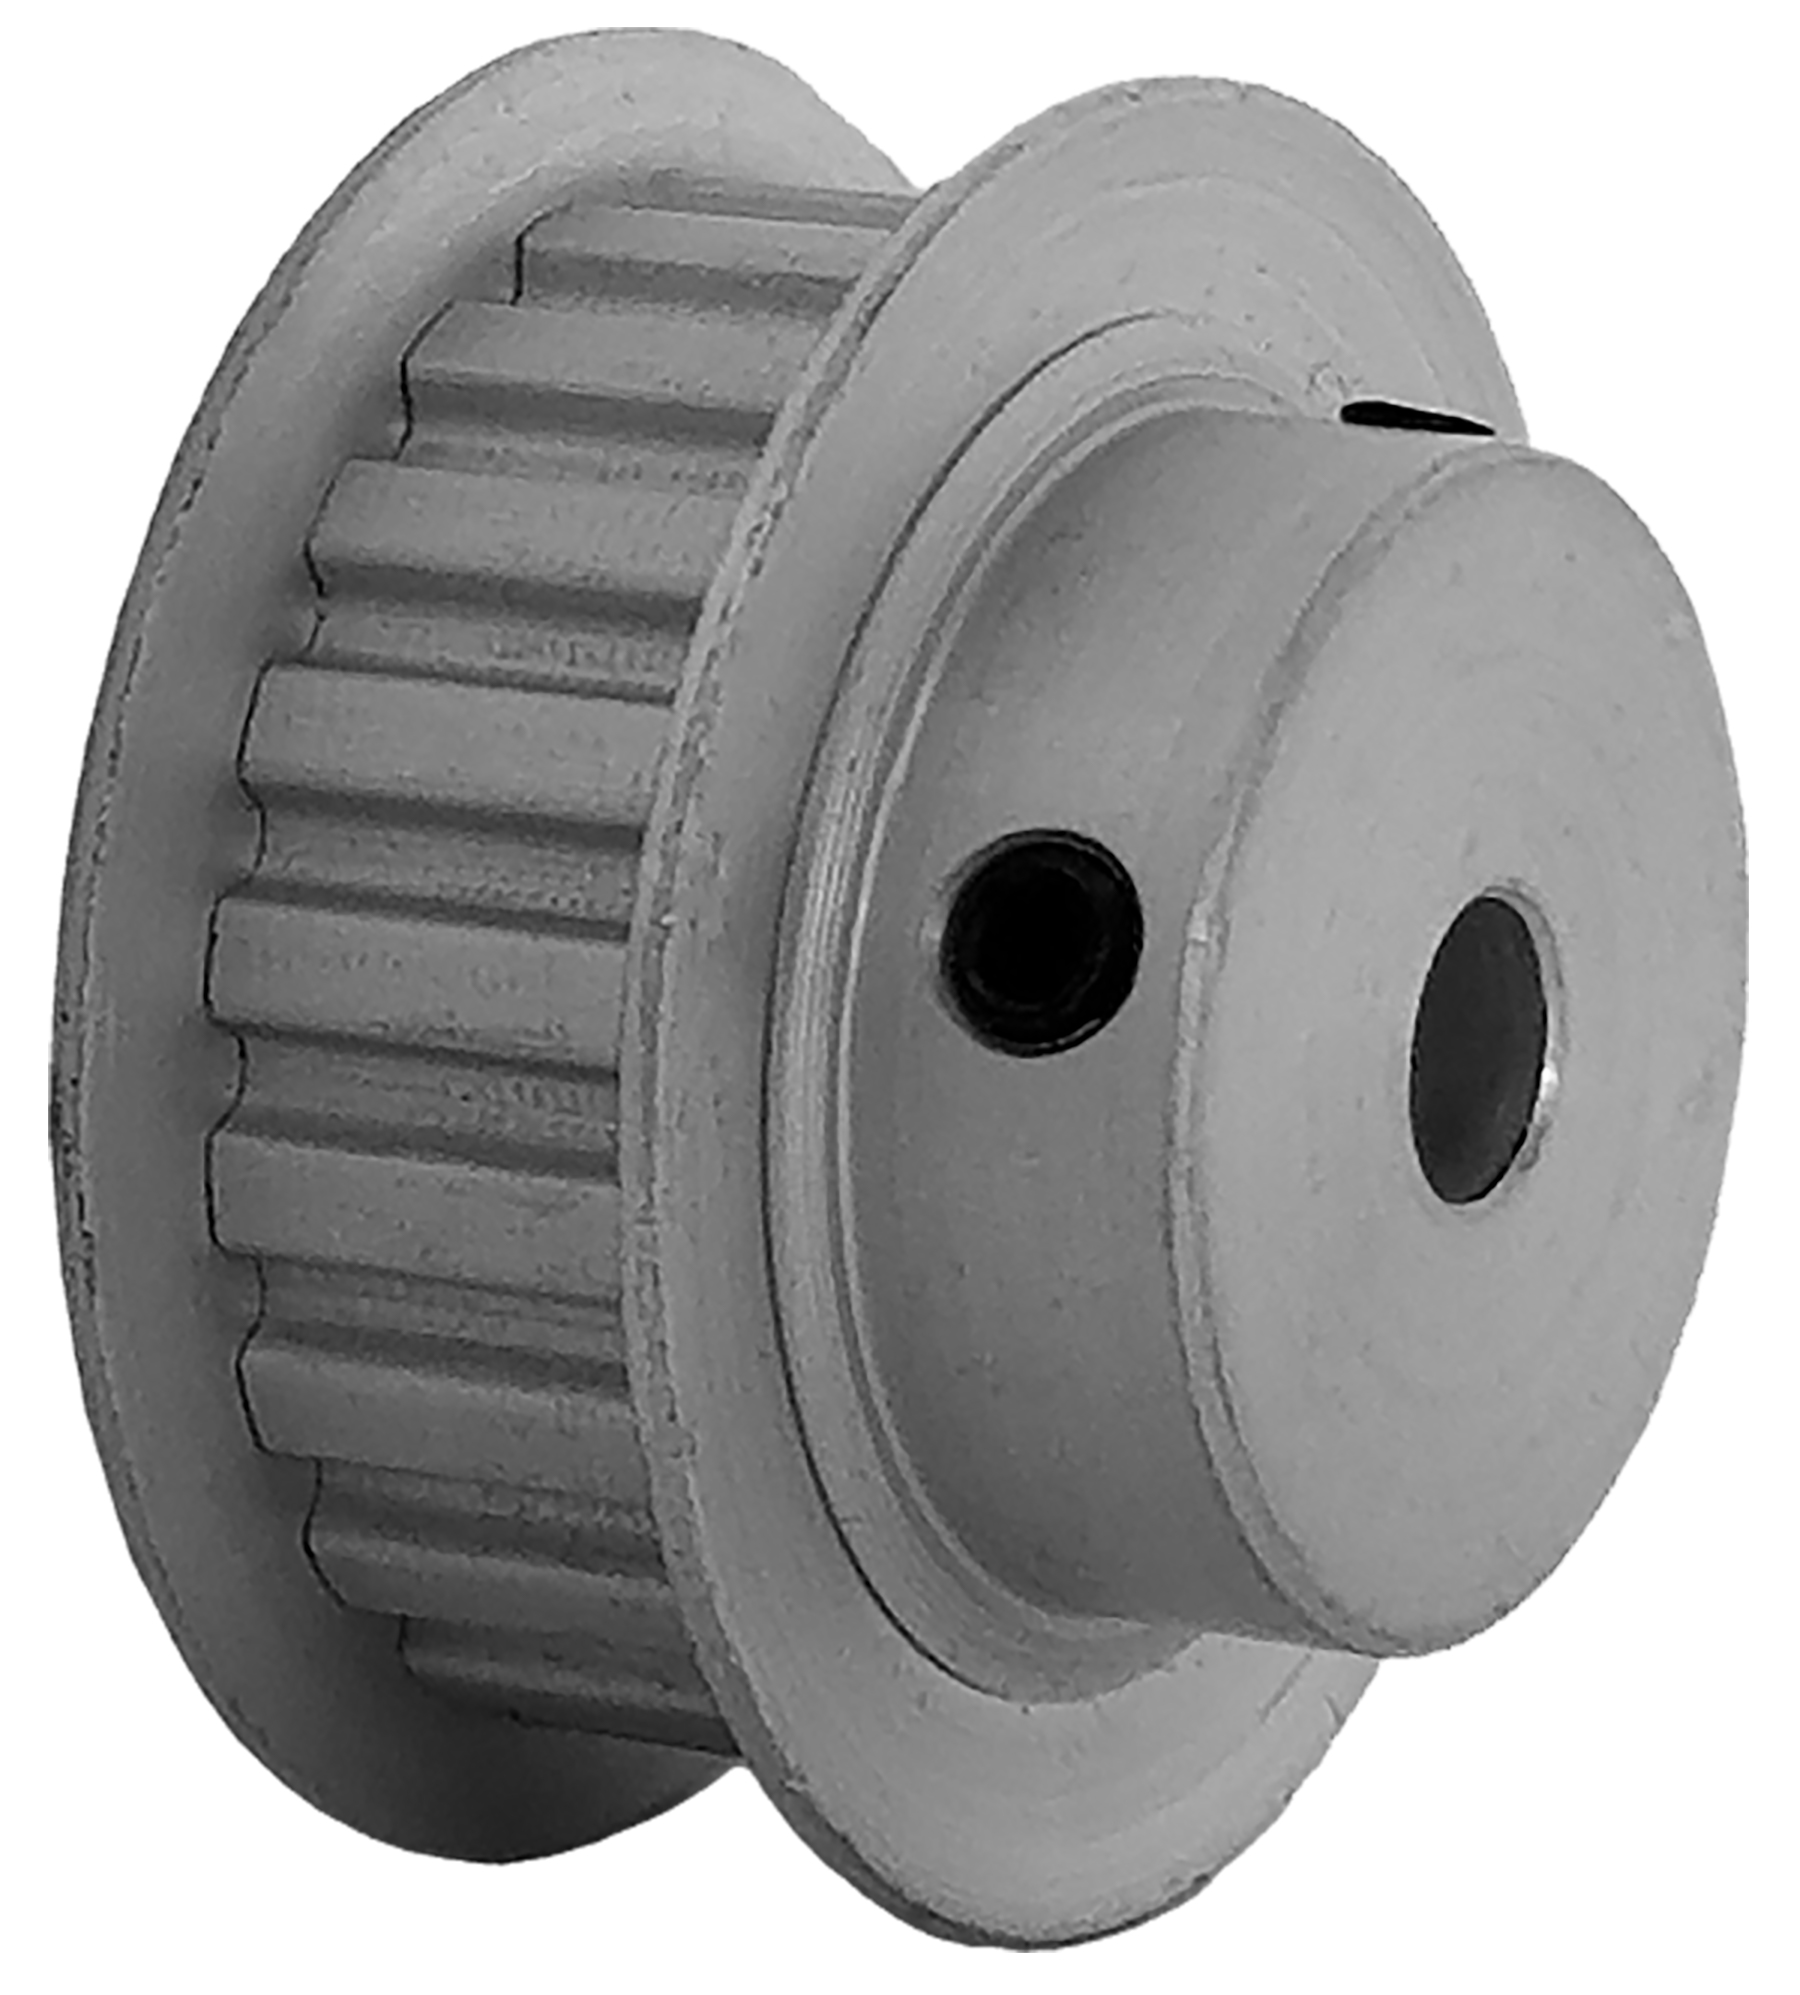 21XL037-6FA3 - Aluminum Imperial Pitch Pulleys